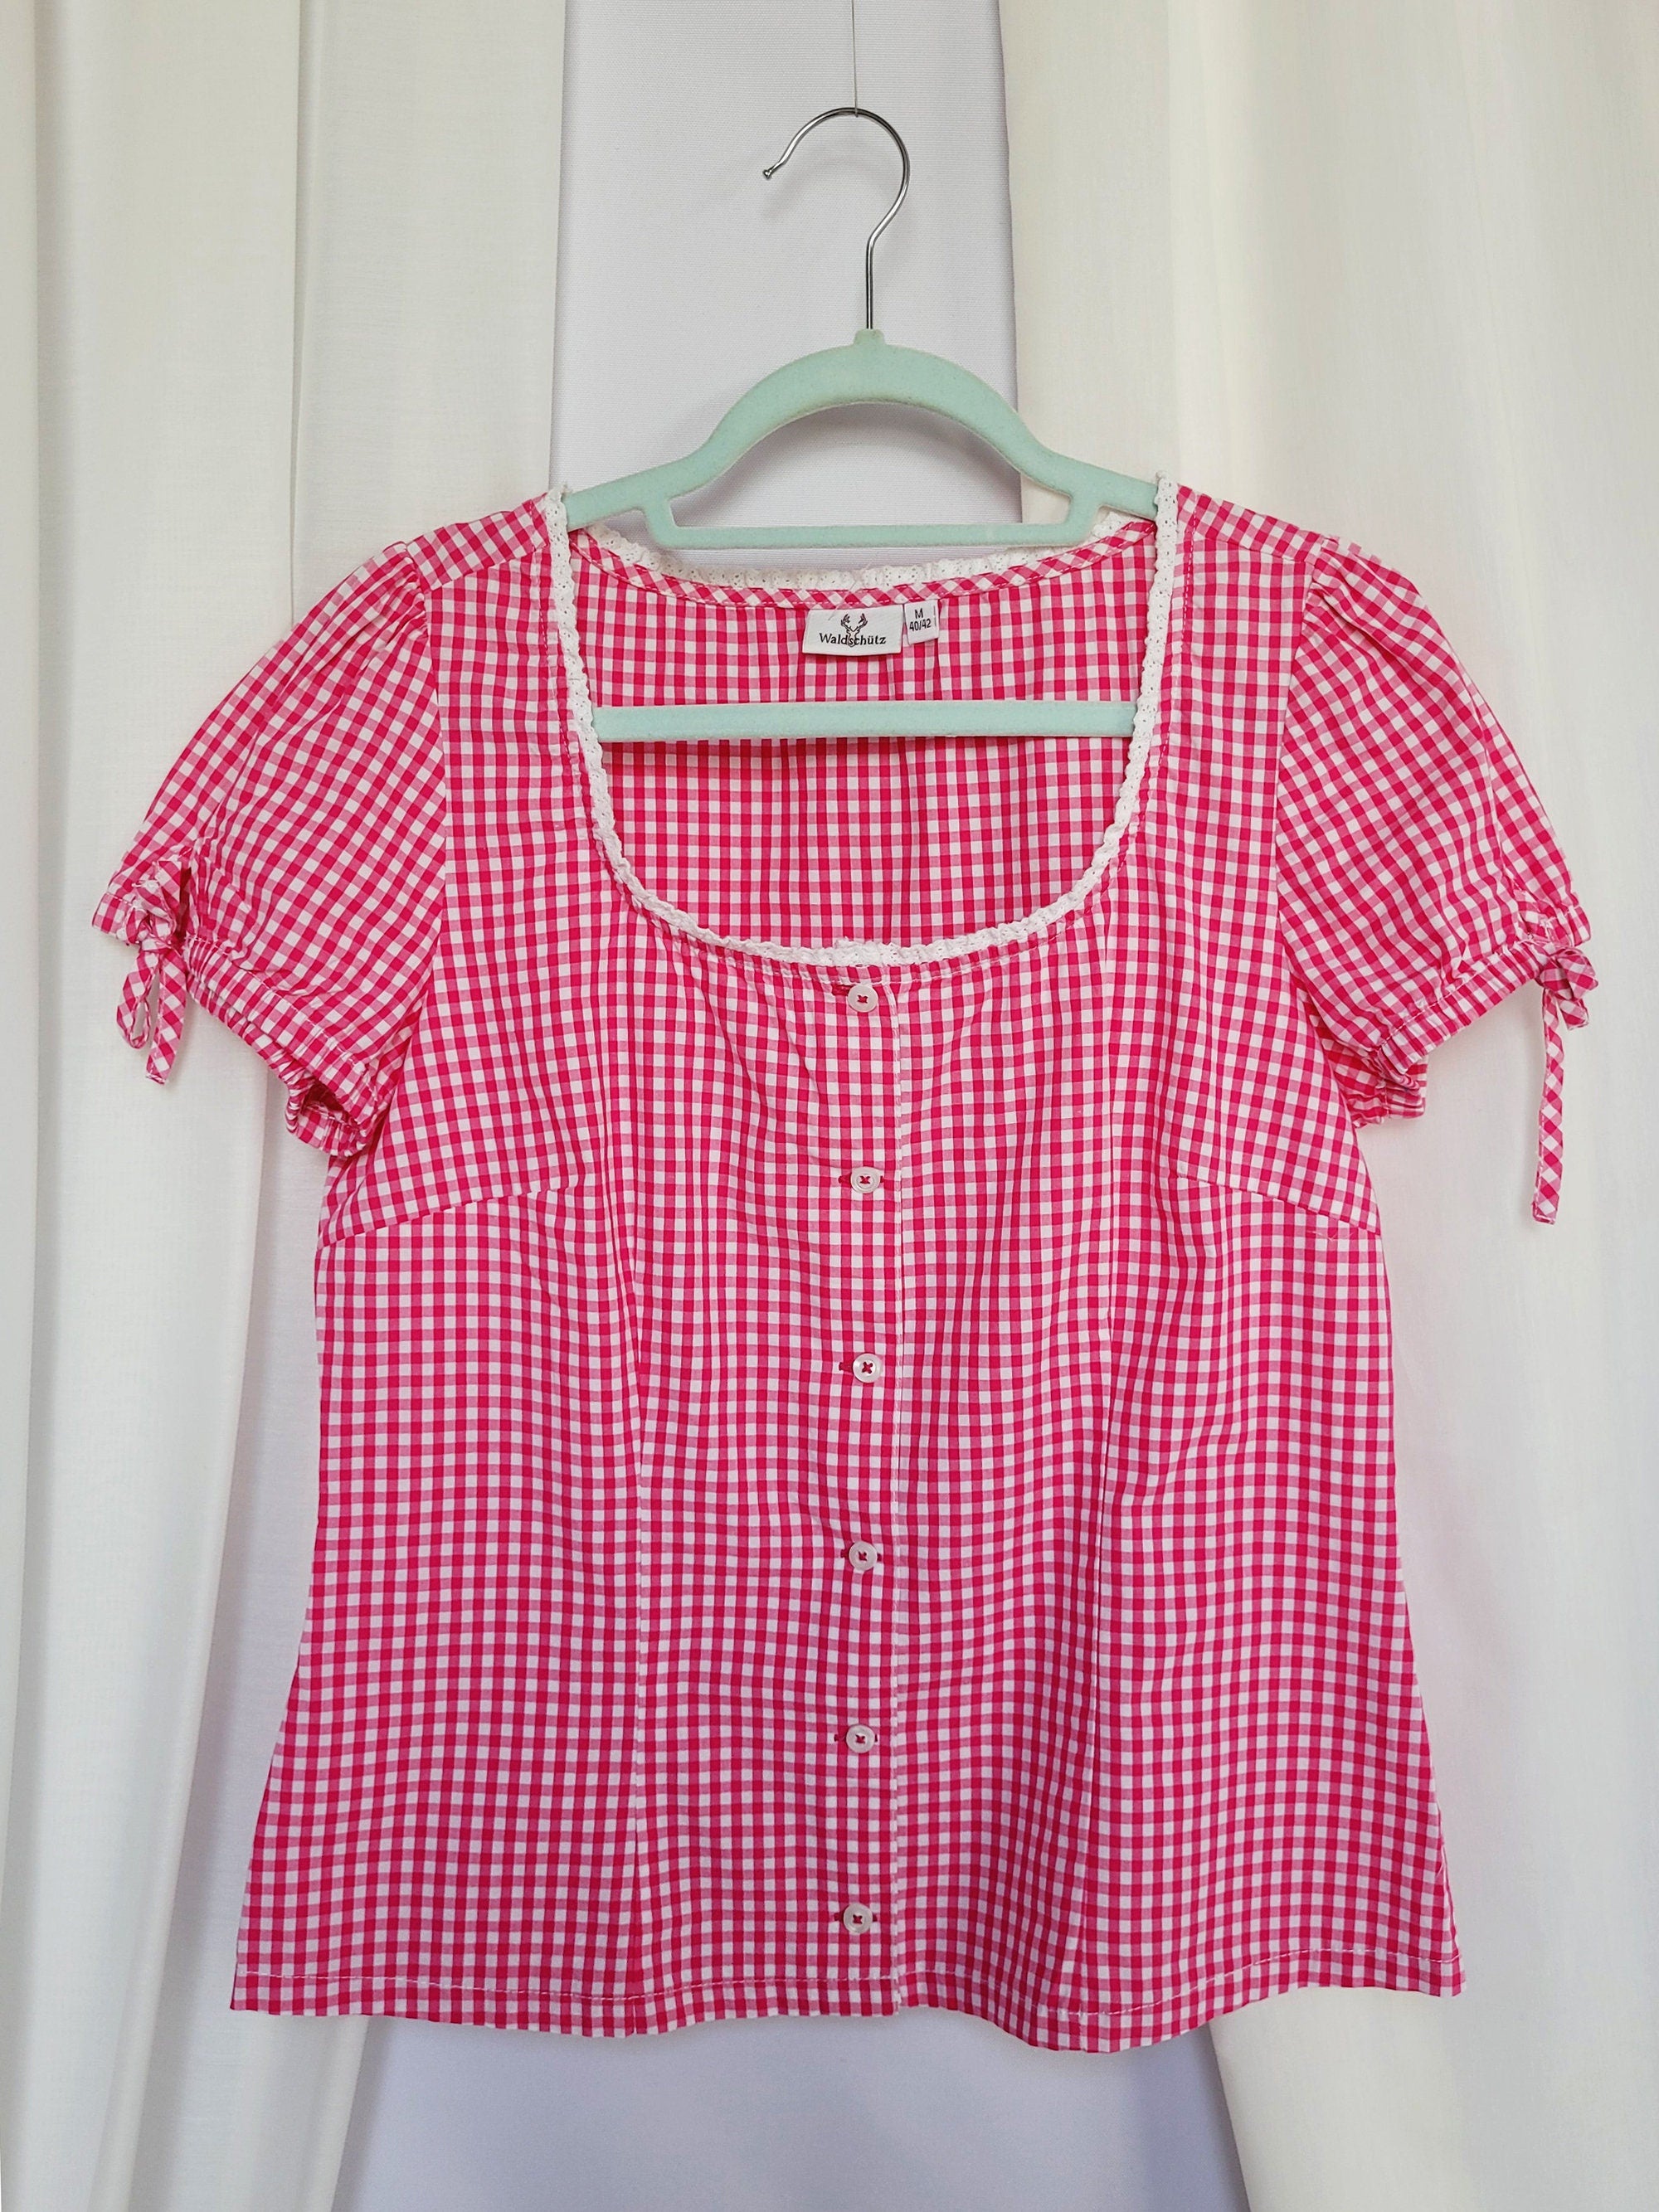 Retro Y2K 00s pink checked puff sleeves Milkmaid blouse